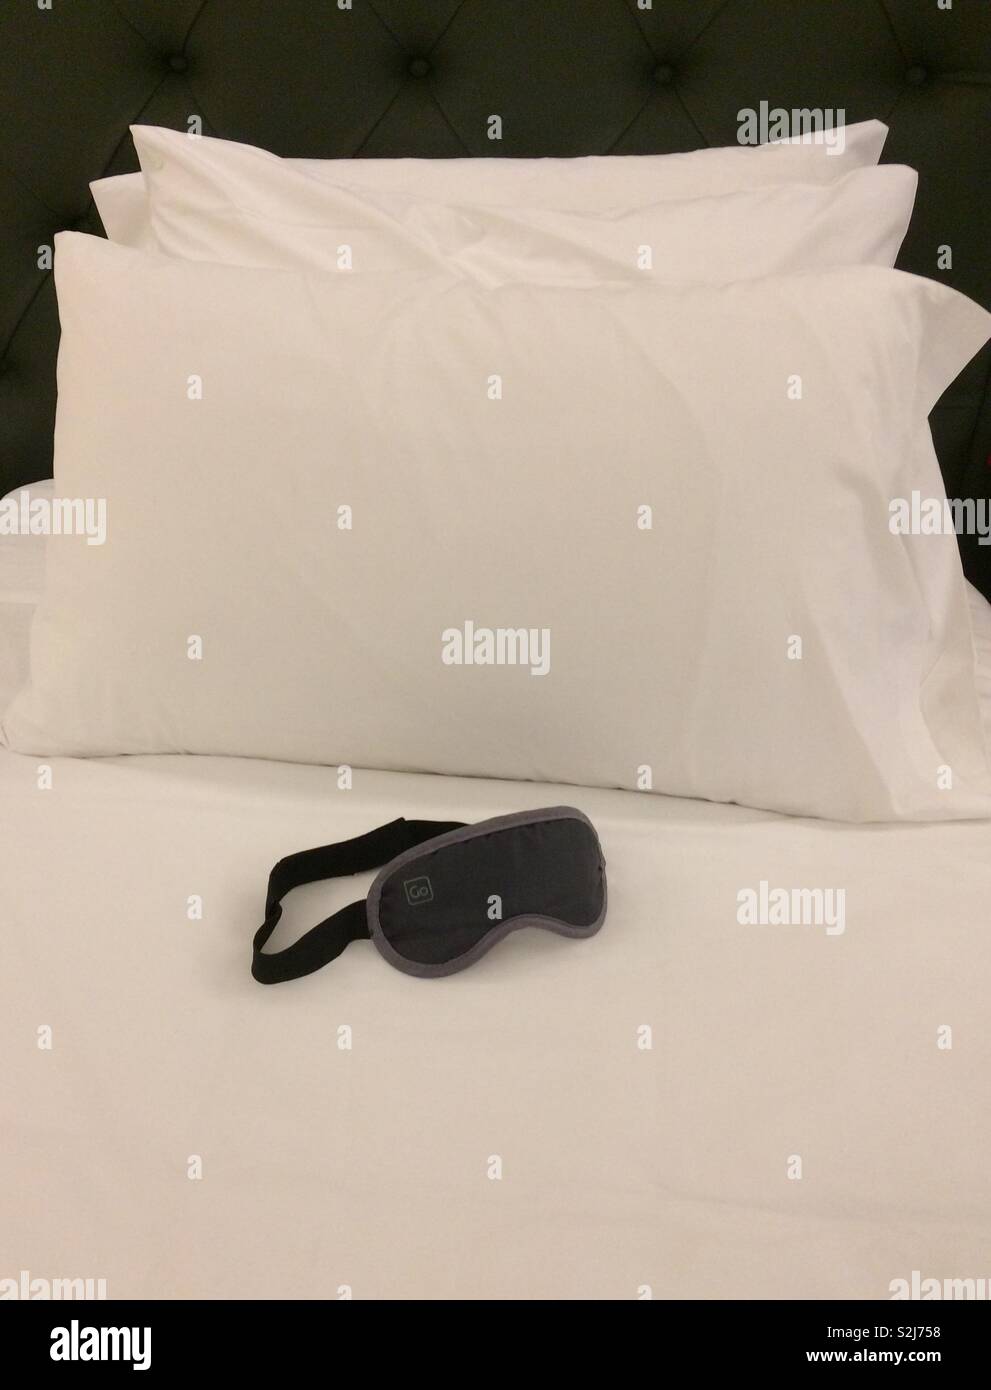 Clean, fresh, white hotel bed linen and three soft pillows on a single bed with eyeshades ready - a study in black and white perfection, and awaiting a sleeper. Stock Photo